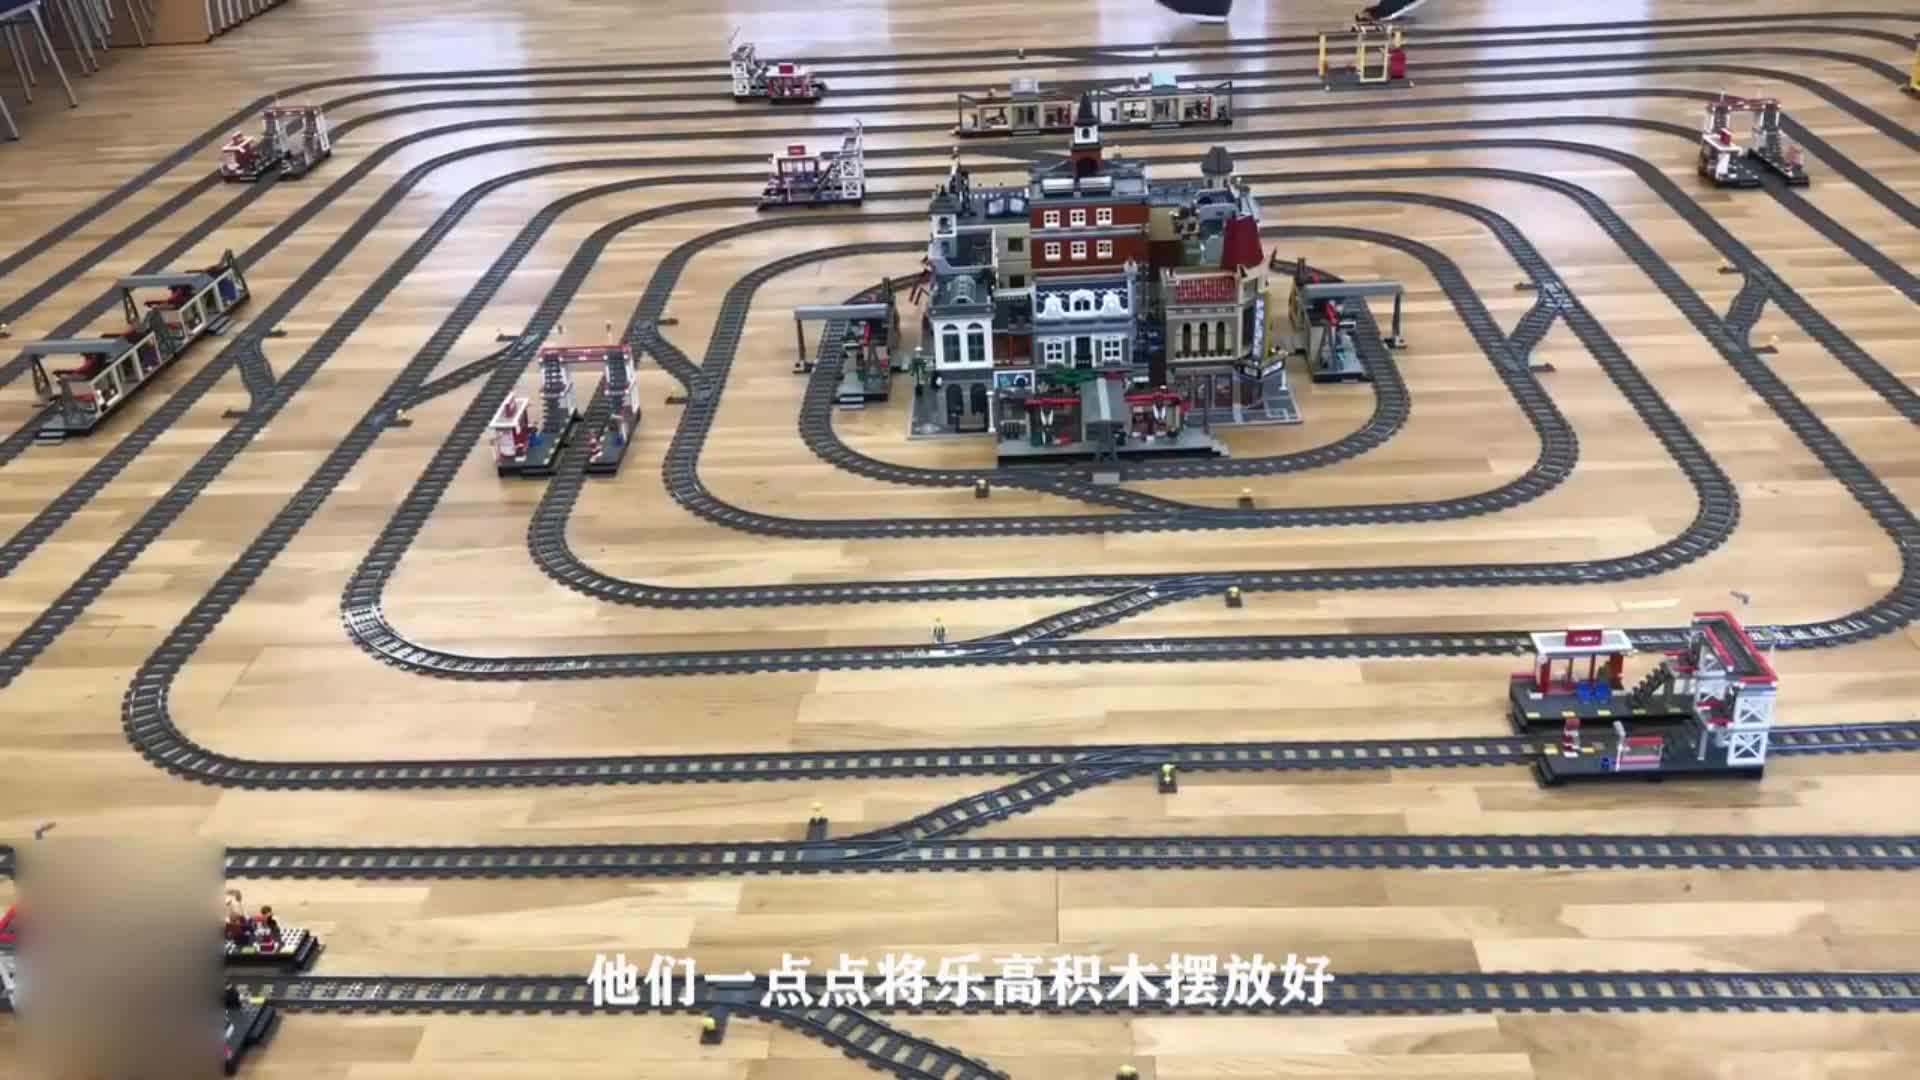 The technology house built a super-long runway with Lego. The effect is amazing. It's really fun.